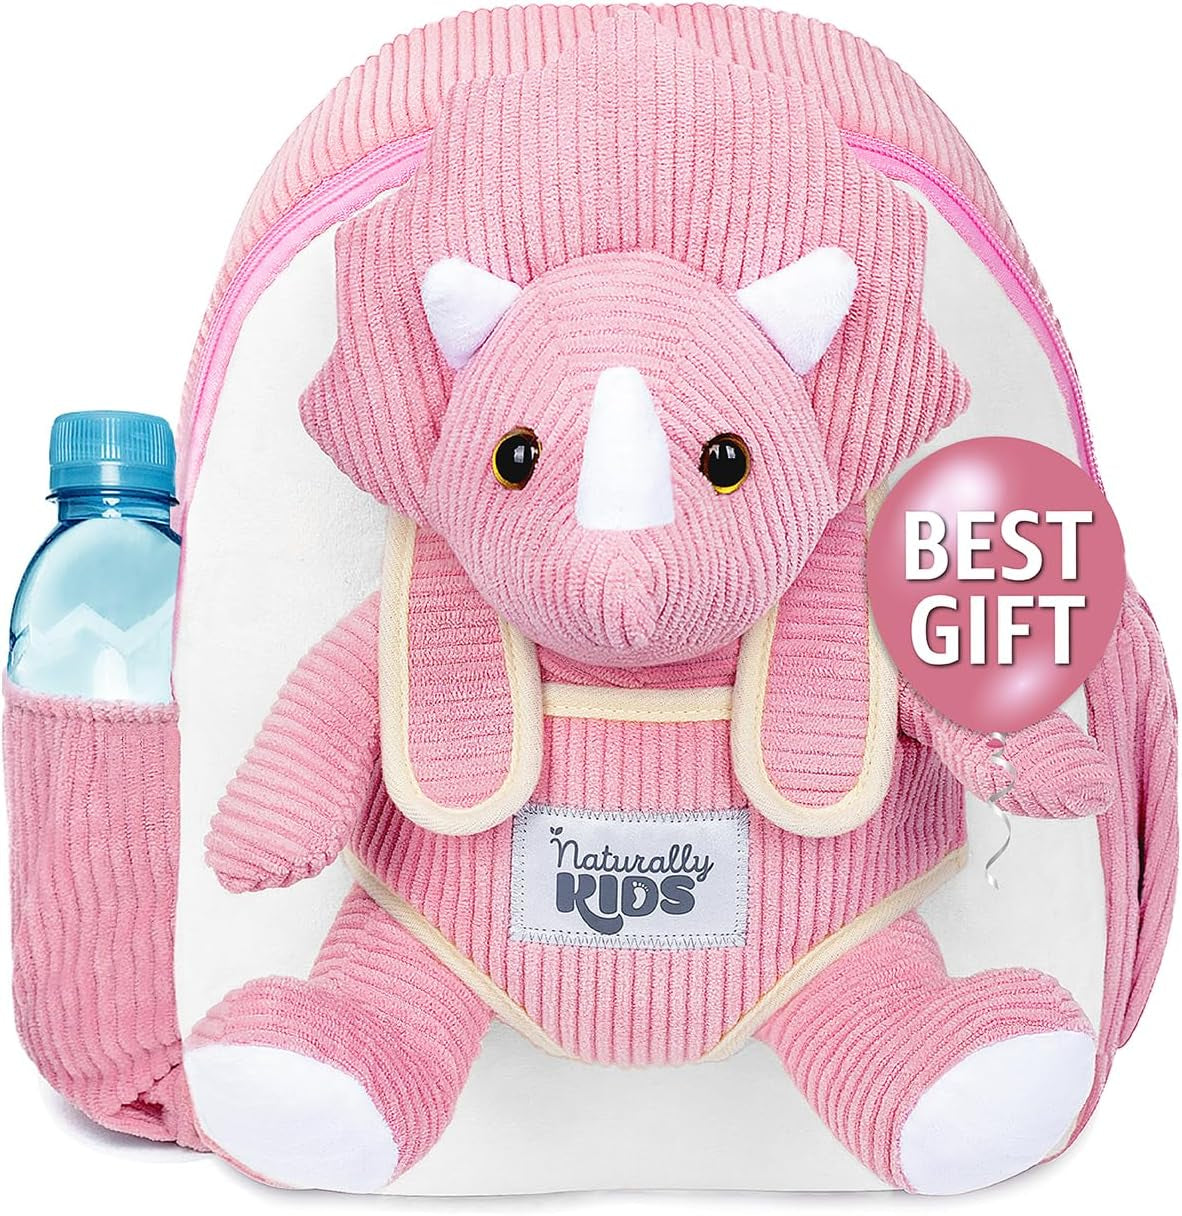 Medium Dinosaur Backpack - Dinosaur Toys for Kids 5-7 - Kids Backpack for Girls W Stuffed Animal - Gifts for 6 Year Old Boy - W Pockets & Reflective Logo - Backpack W Pink Triceratops